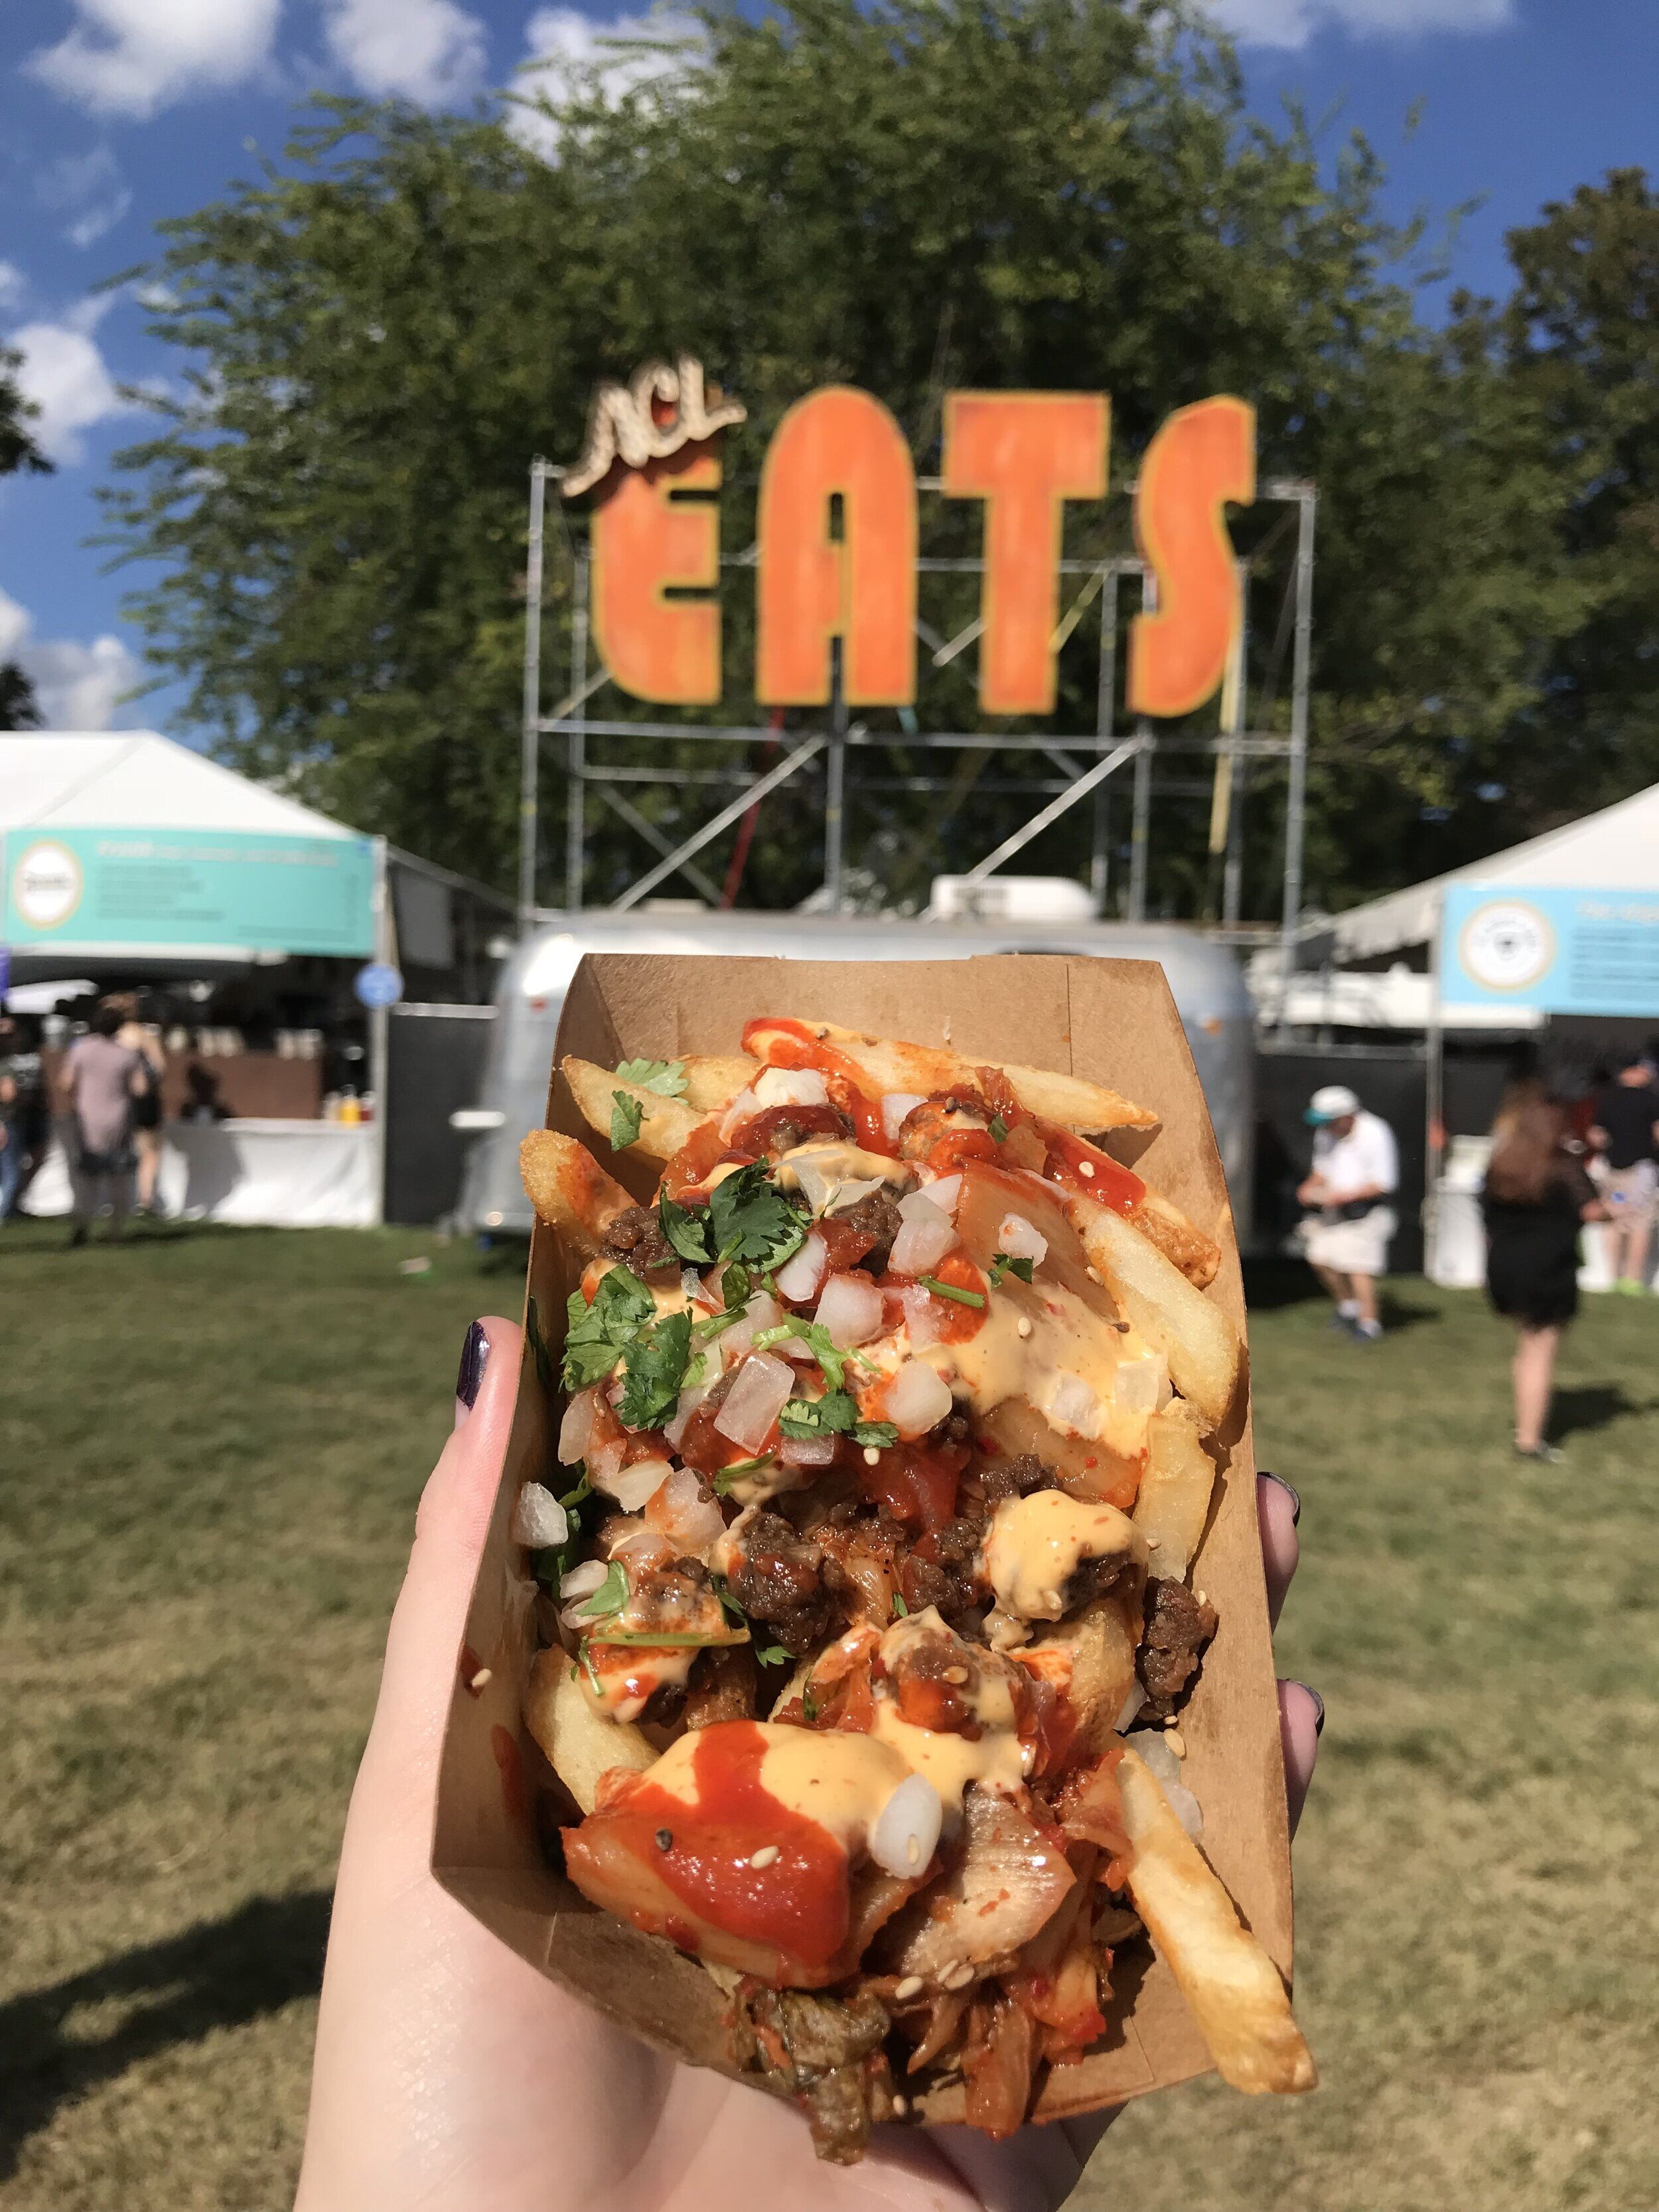 Loaded french fries at Coachella themed festival